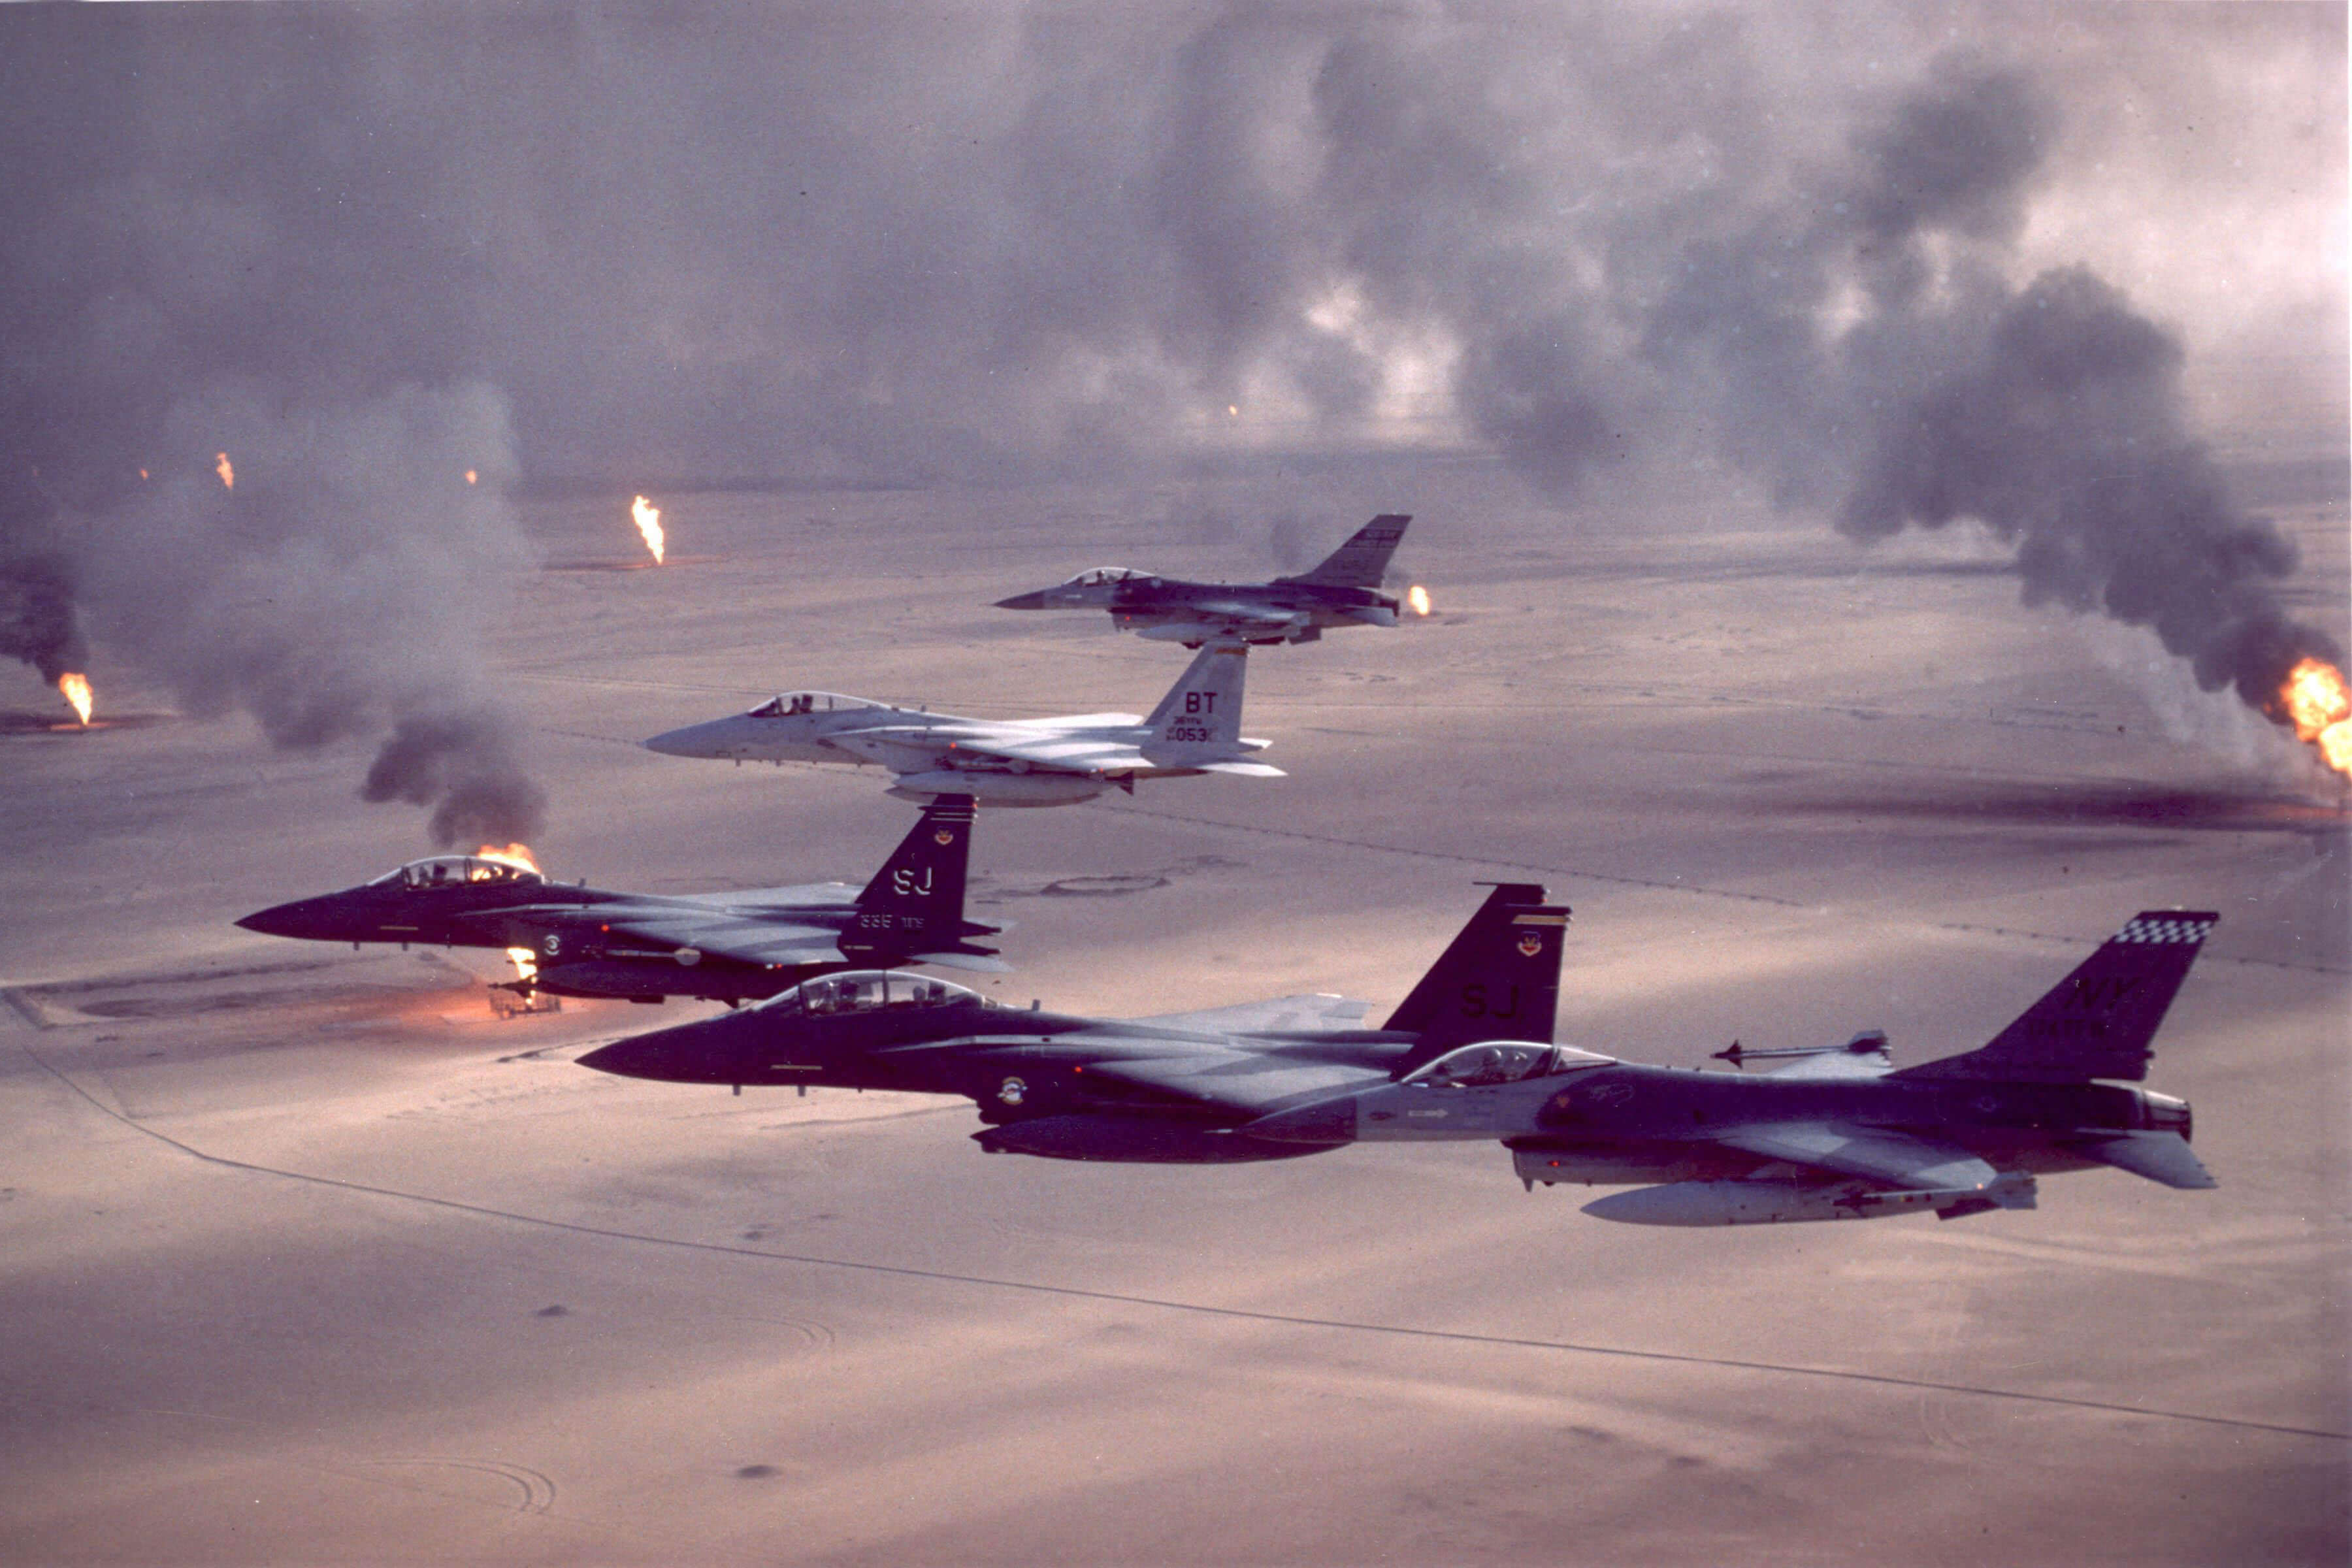 Planes making a bombing run during Operation Desert Storm